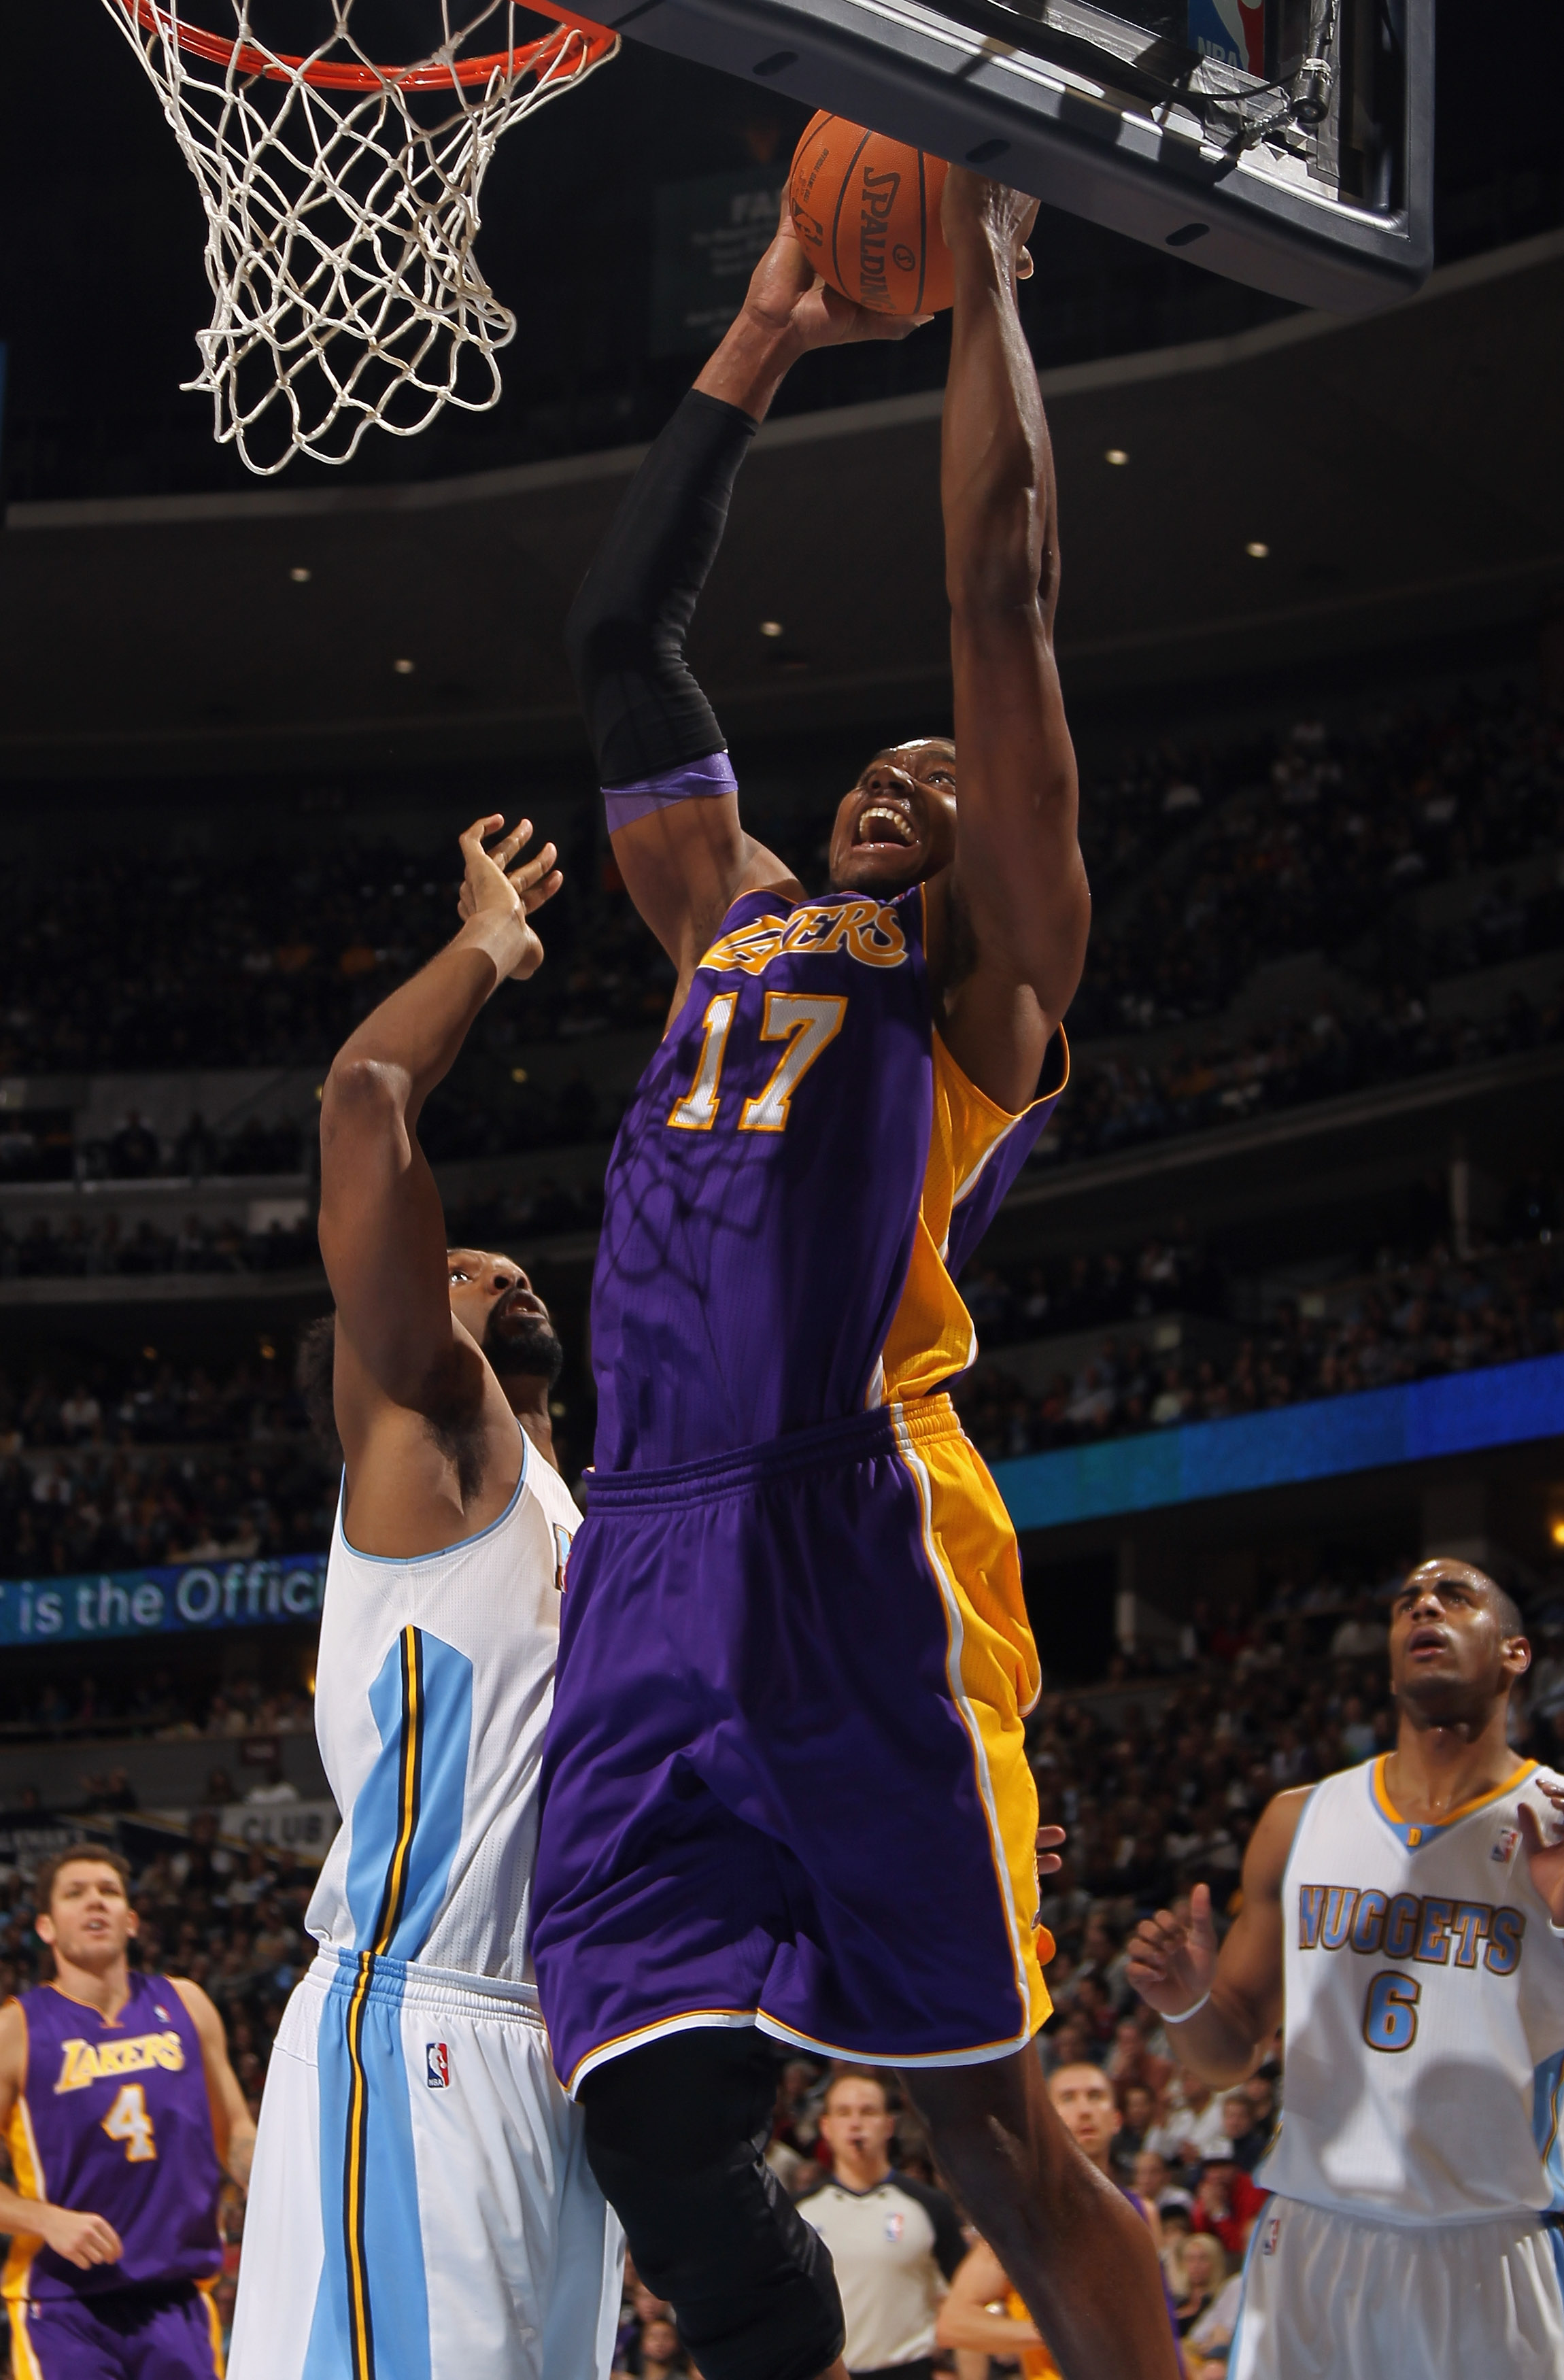 DENVER, CO - JANUARY 21:  Andrew Bynum #17 of the Los Angeles Lakers takes a shot against Nene #31 of the Denver Nuggets at the Pepsi Center on January 21, 2011 in Denver, Colorado. NOTE TO USER: User expressly acknowledges and agrees that, by downloading